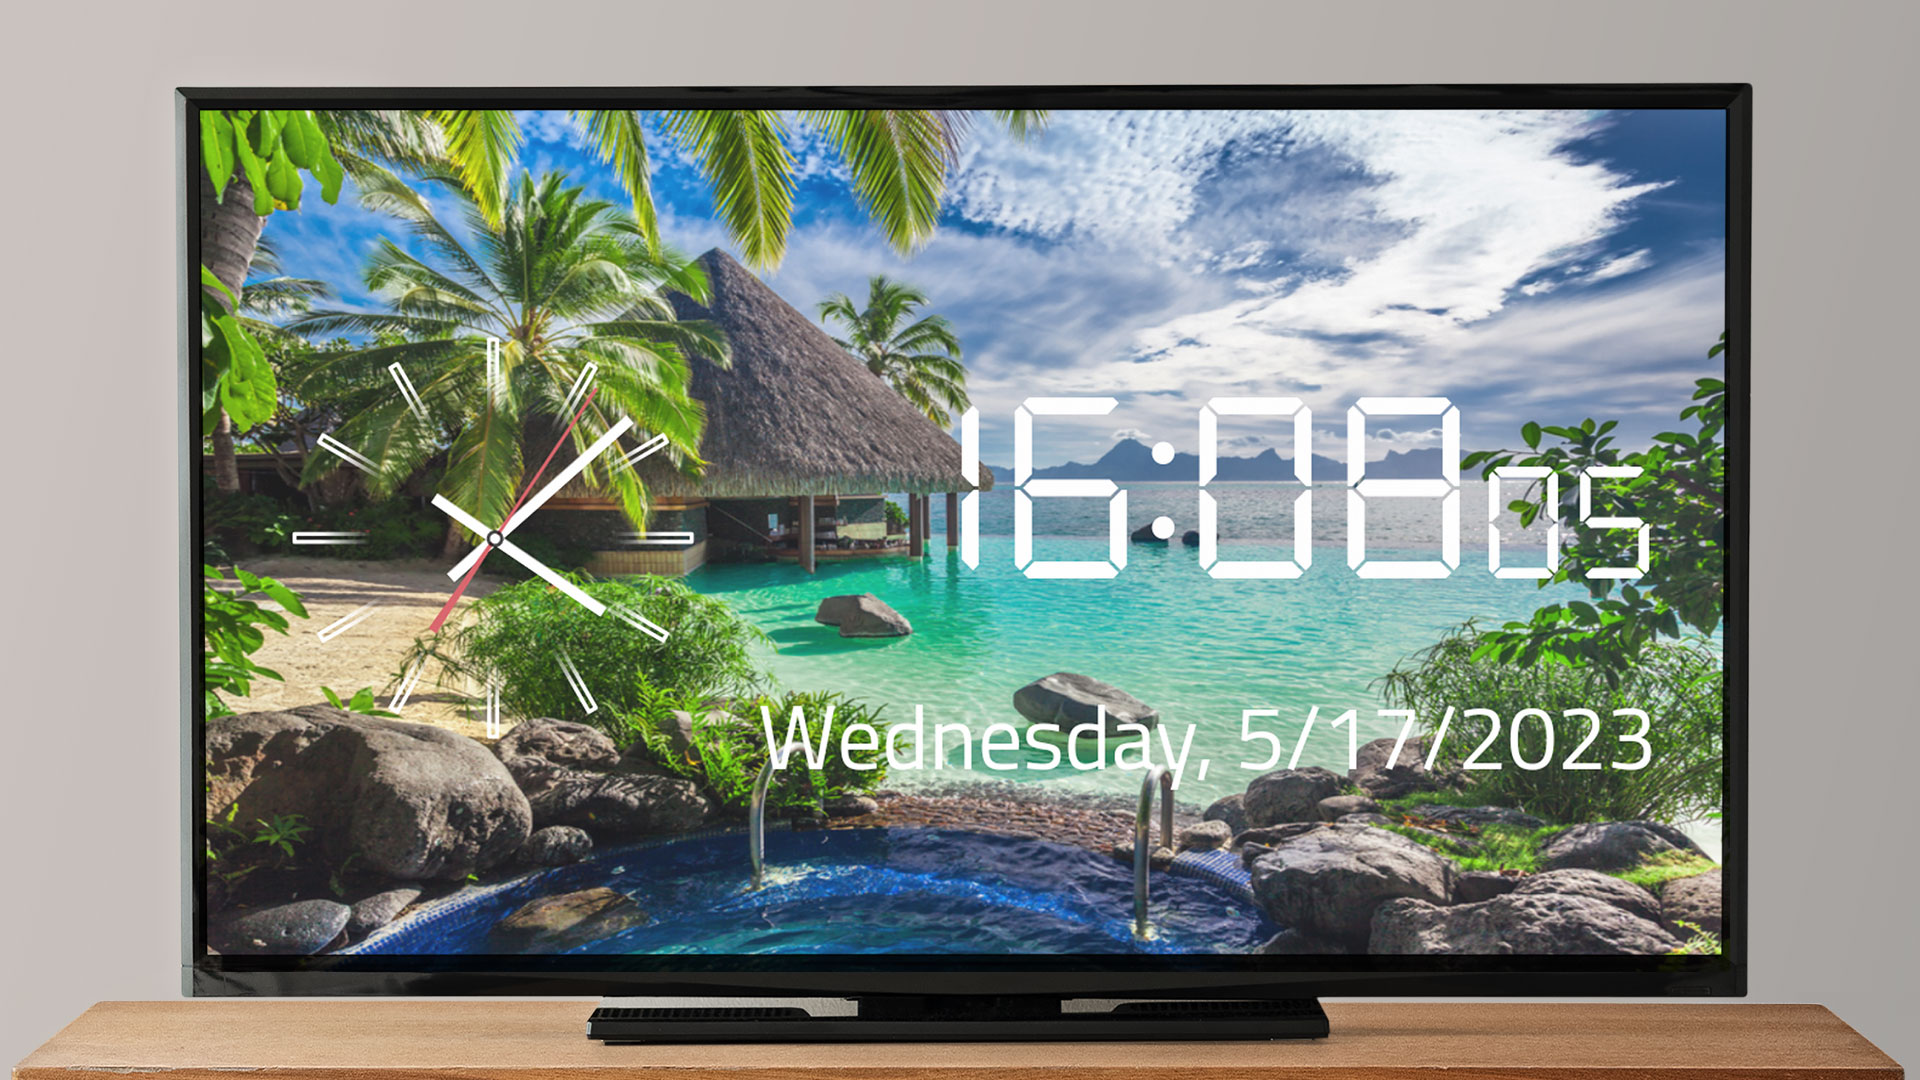 Paradise Clock UHD : Analog, Alarm, Events And Digital Clock UHD Screensaver For Tablets And Fire TV - NO ADS